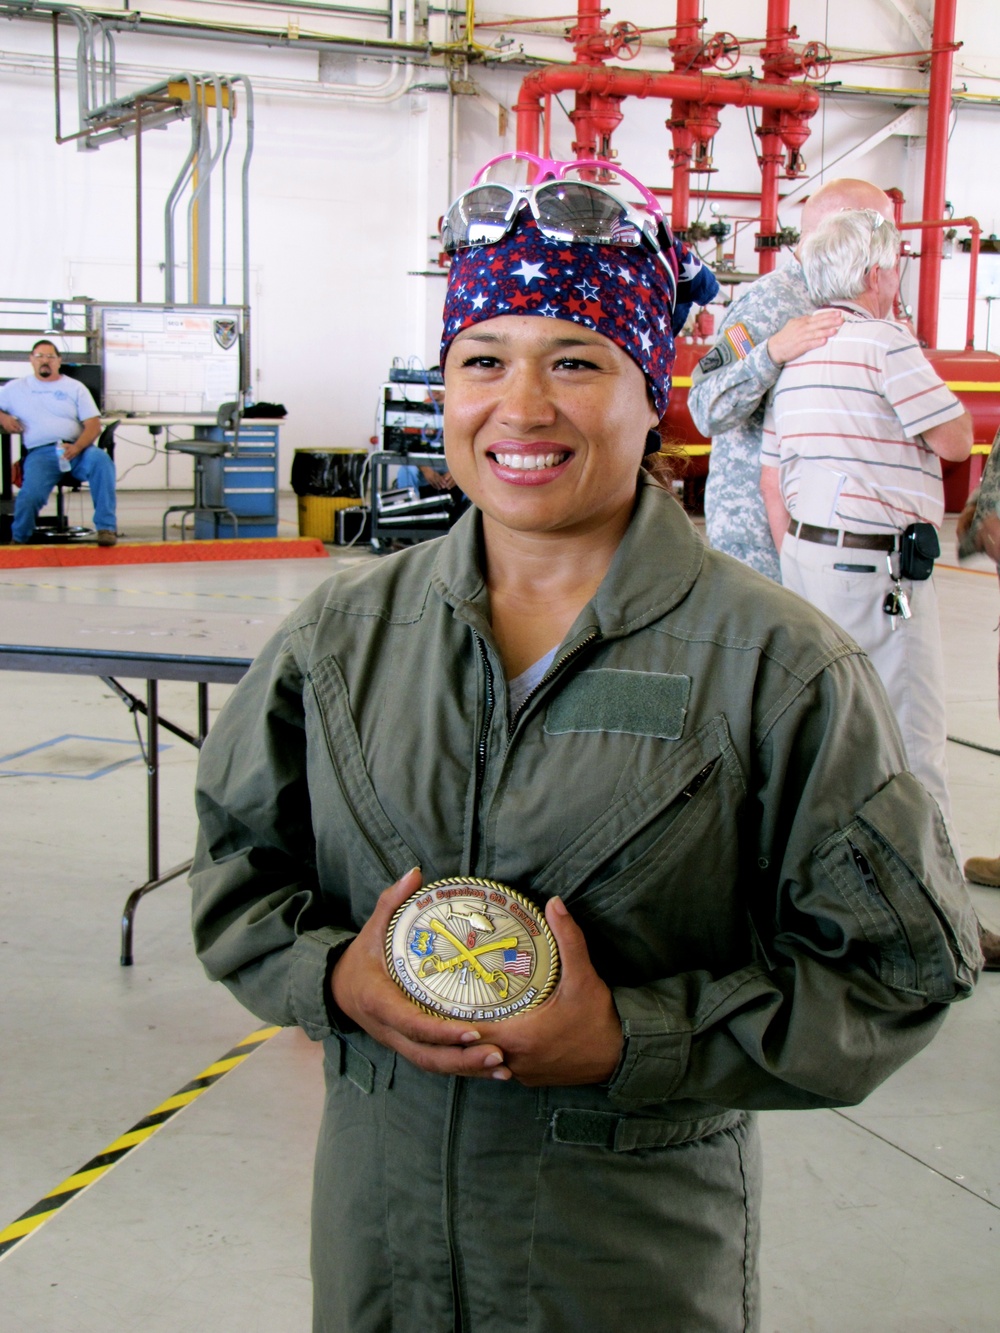 CCAD worker receives special buckle from squadron commander